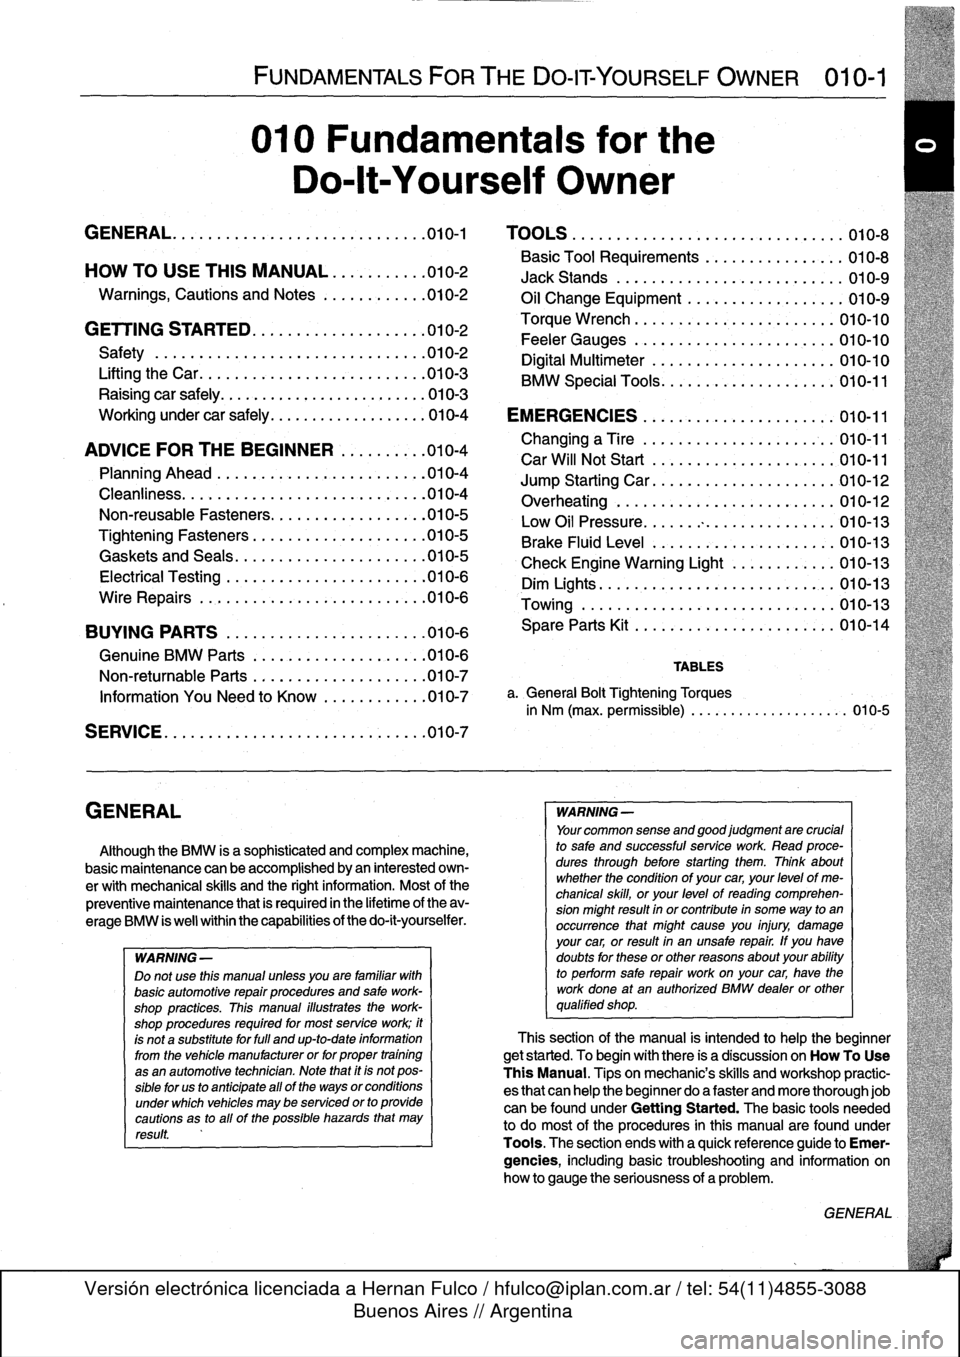 BMW 318i 1998 E36 Workshop Manual 
GENERAL

FUNDAMENTALS
FORTHE
DO-IT
YOURSELF
OWNER

	

010-1

010
Fundamentals
for
the

Do-lt-Yourself
Owner

GENERAL
.......
.
.
.
......
.
.........
.
.
.010-1

	

TOOLS
.
.
...
.
............
.
...